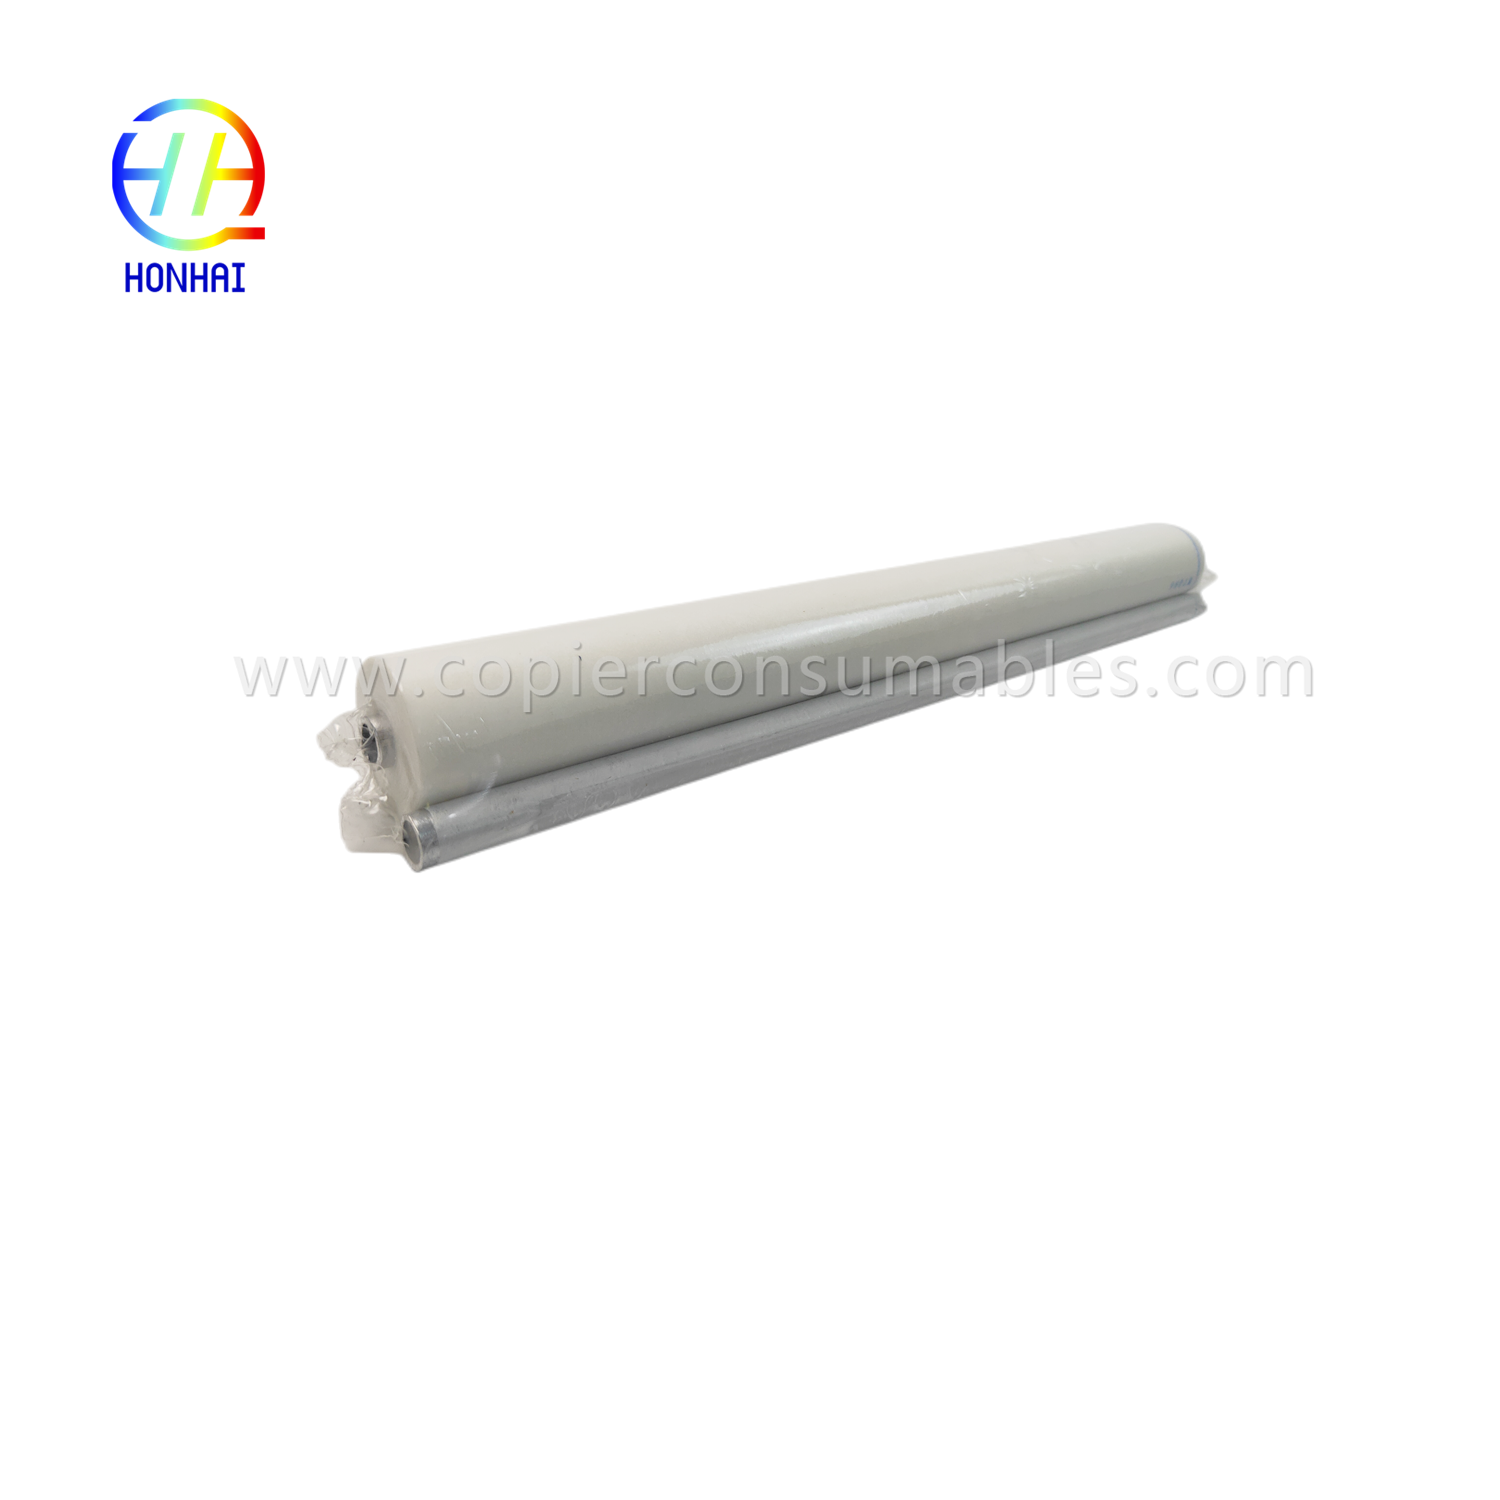 https://www.copierconsumables.com/fuser-cleaning-web-for-canon-ir6800-ir-8085-8095-8105-8205-8285-8295-fq-009-fc5-2286-000-oem-fuser-cleaning-fuser-roller-product/